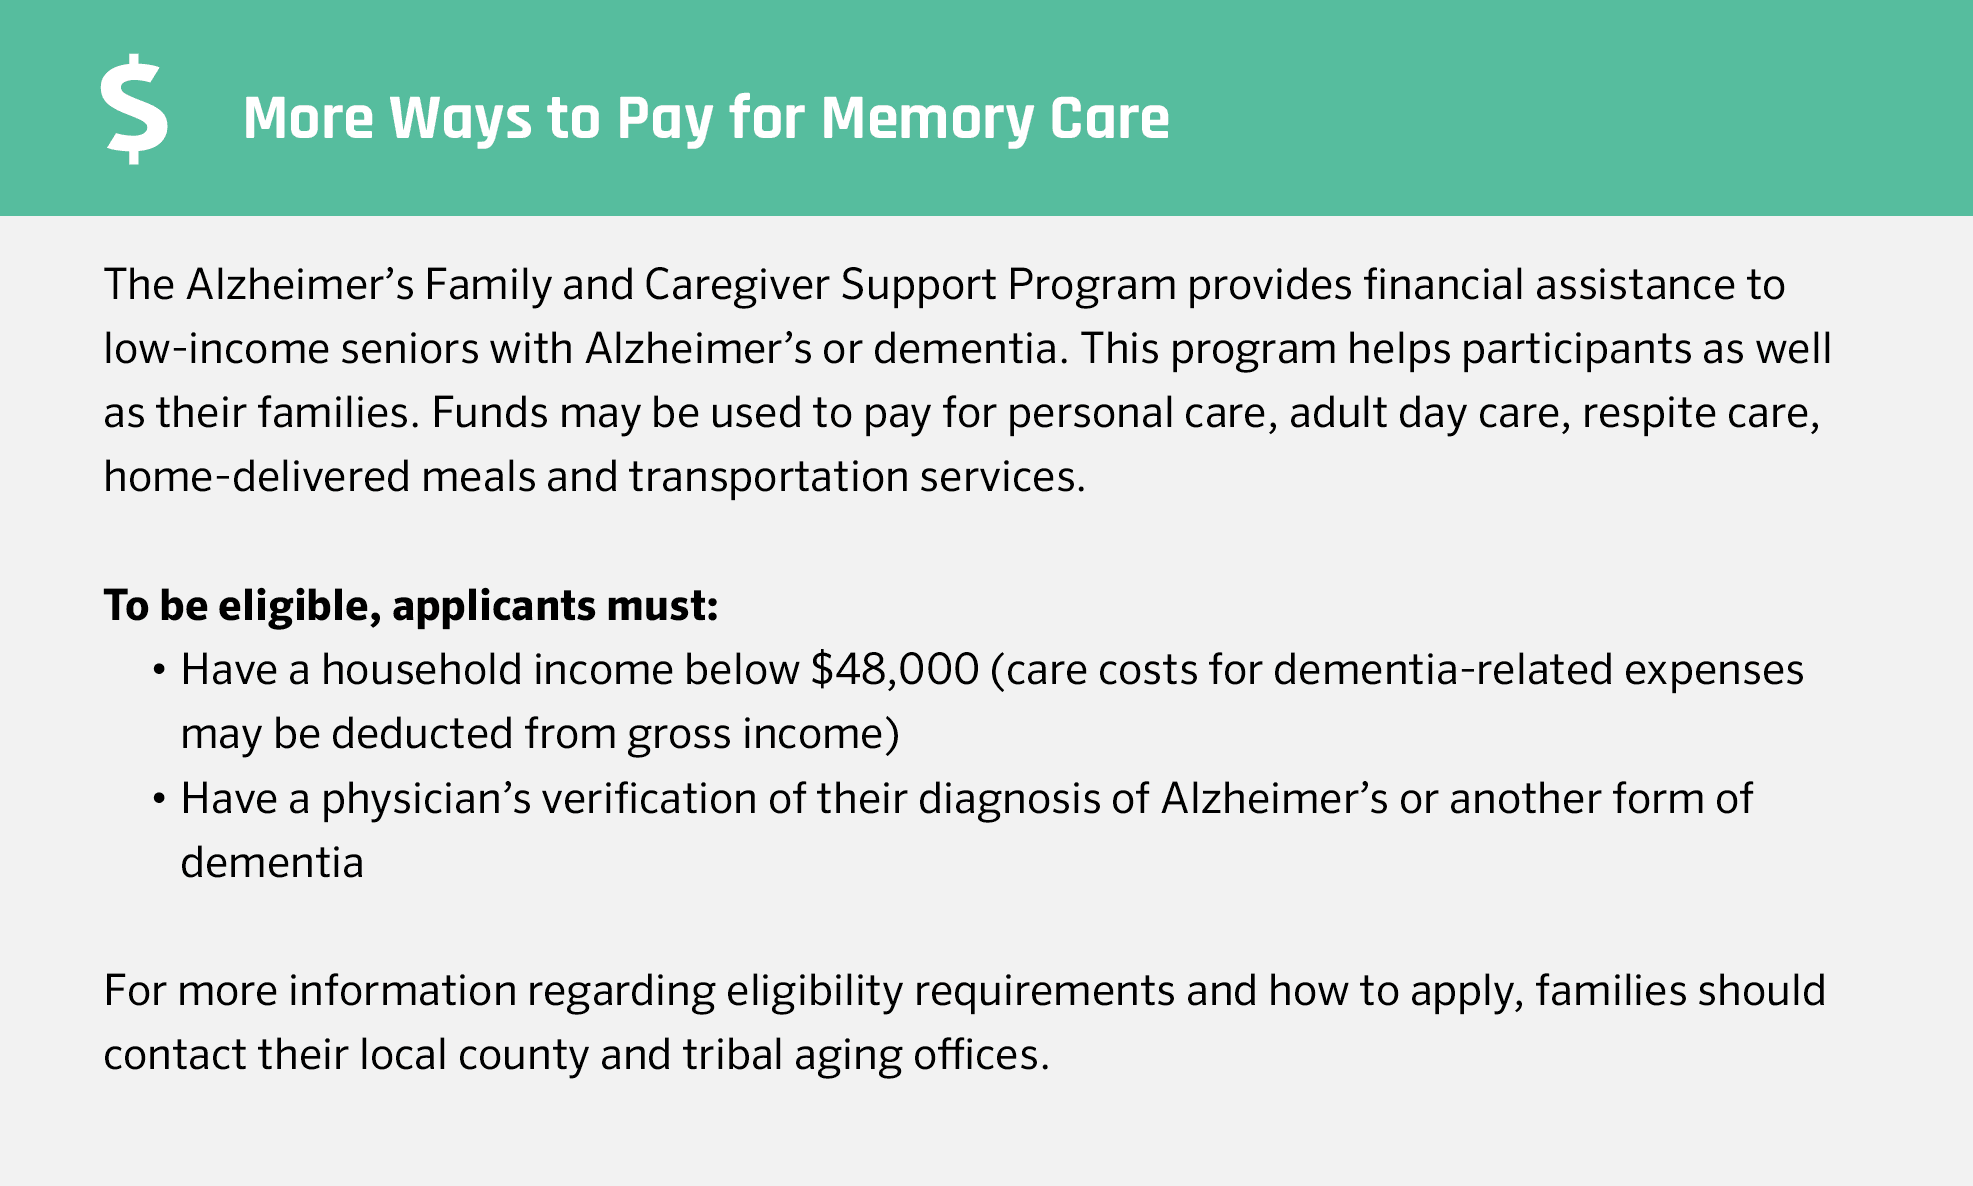 more ways to pay for memory care in Wisconsin